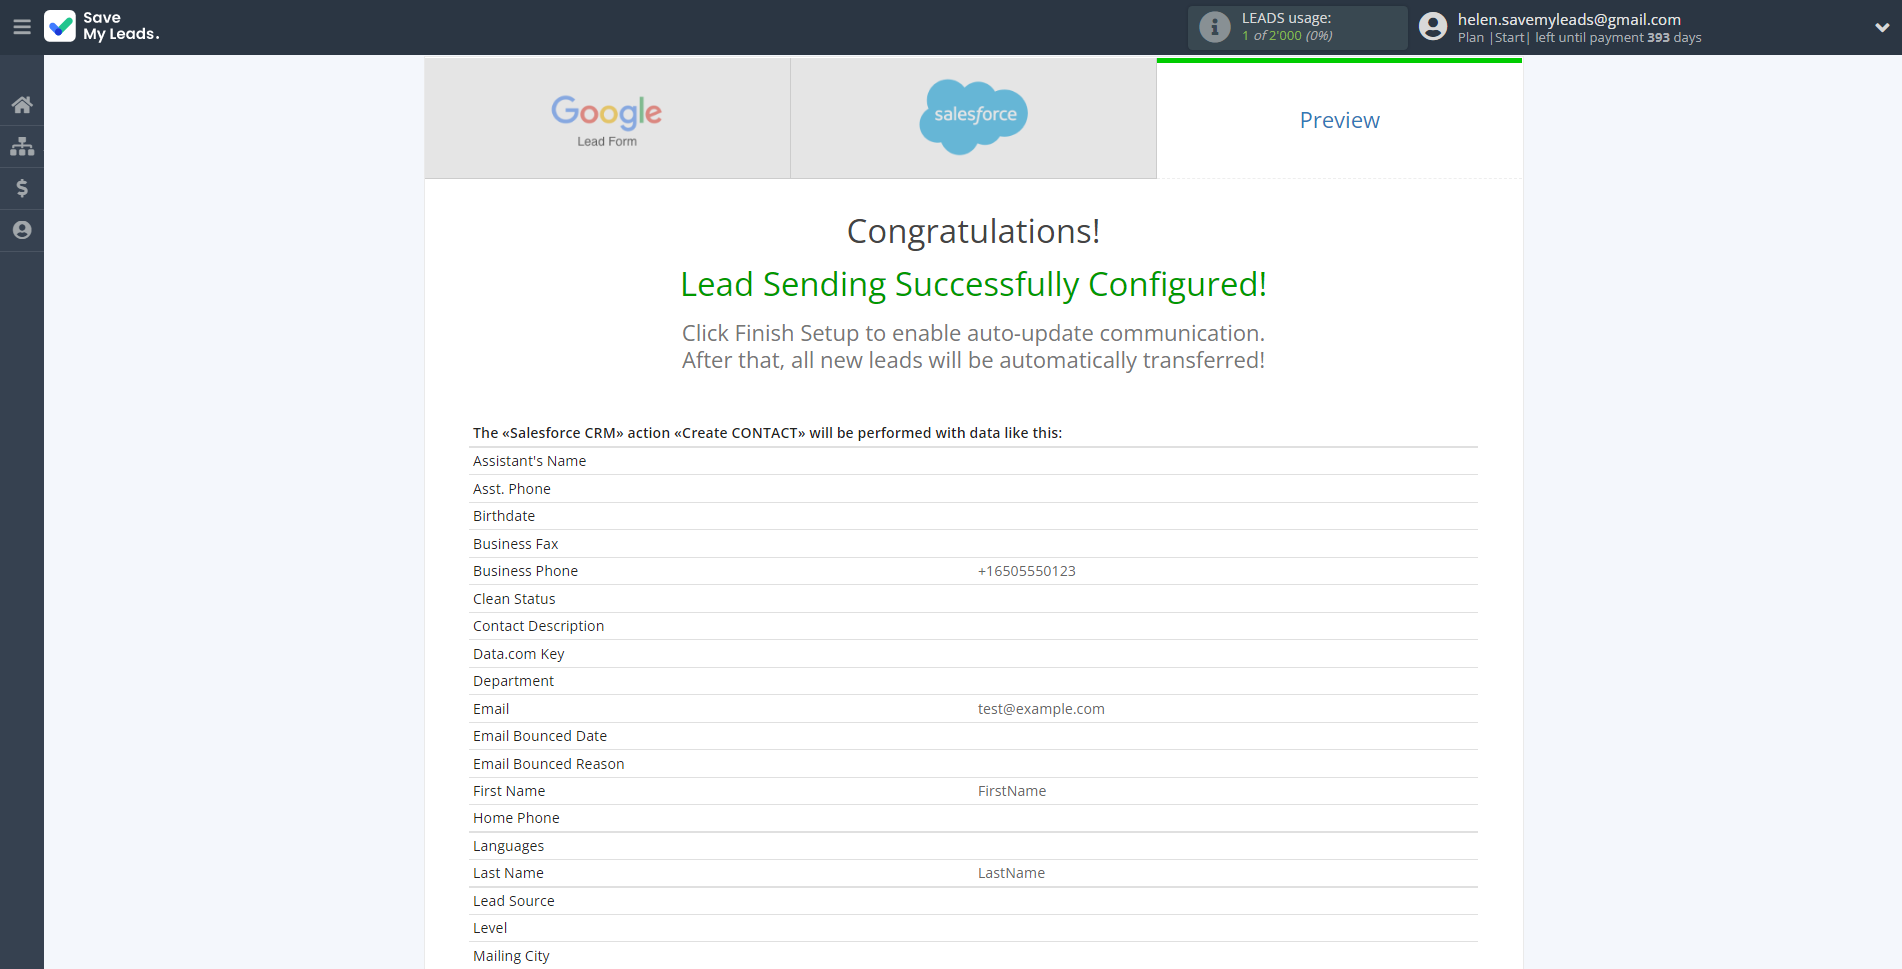 How to Connect Google Lead Form with Salesforce CRM Create Contacts | Test data